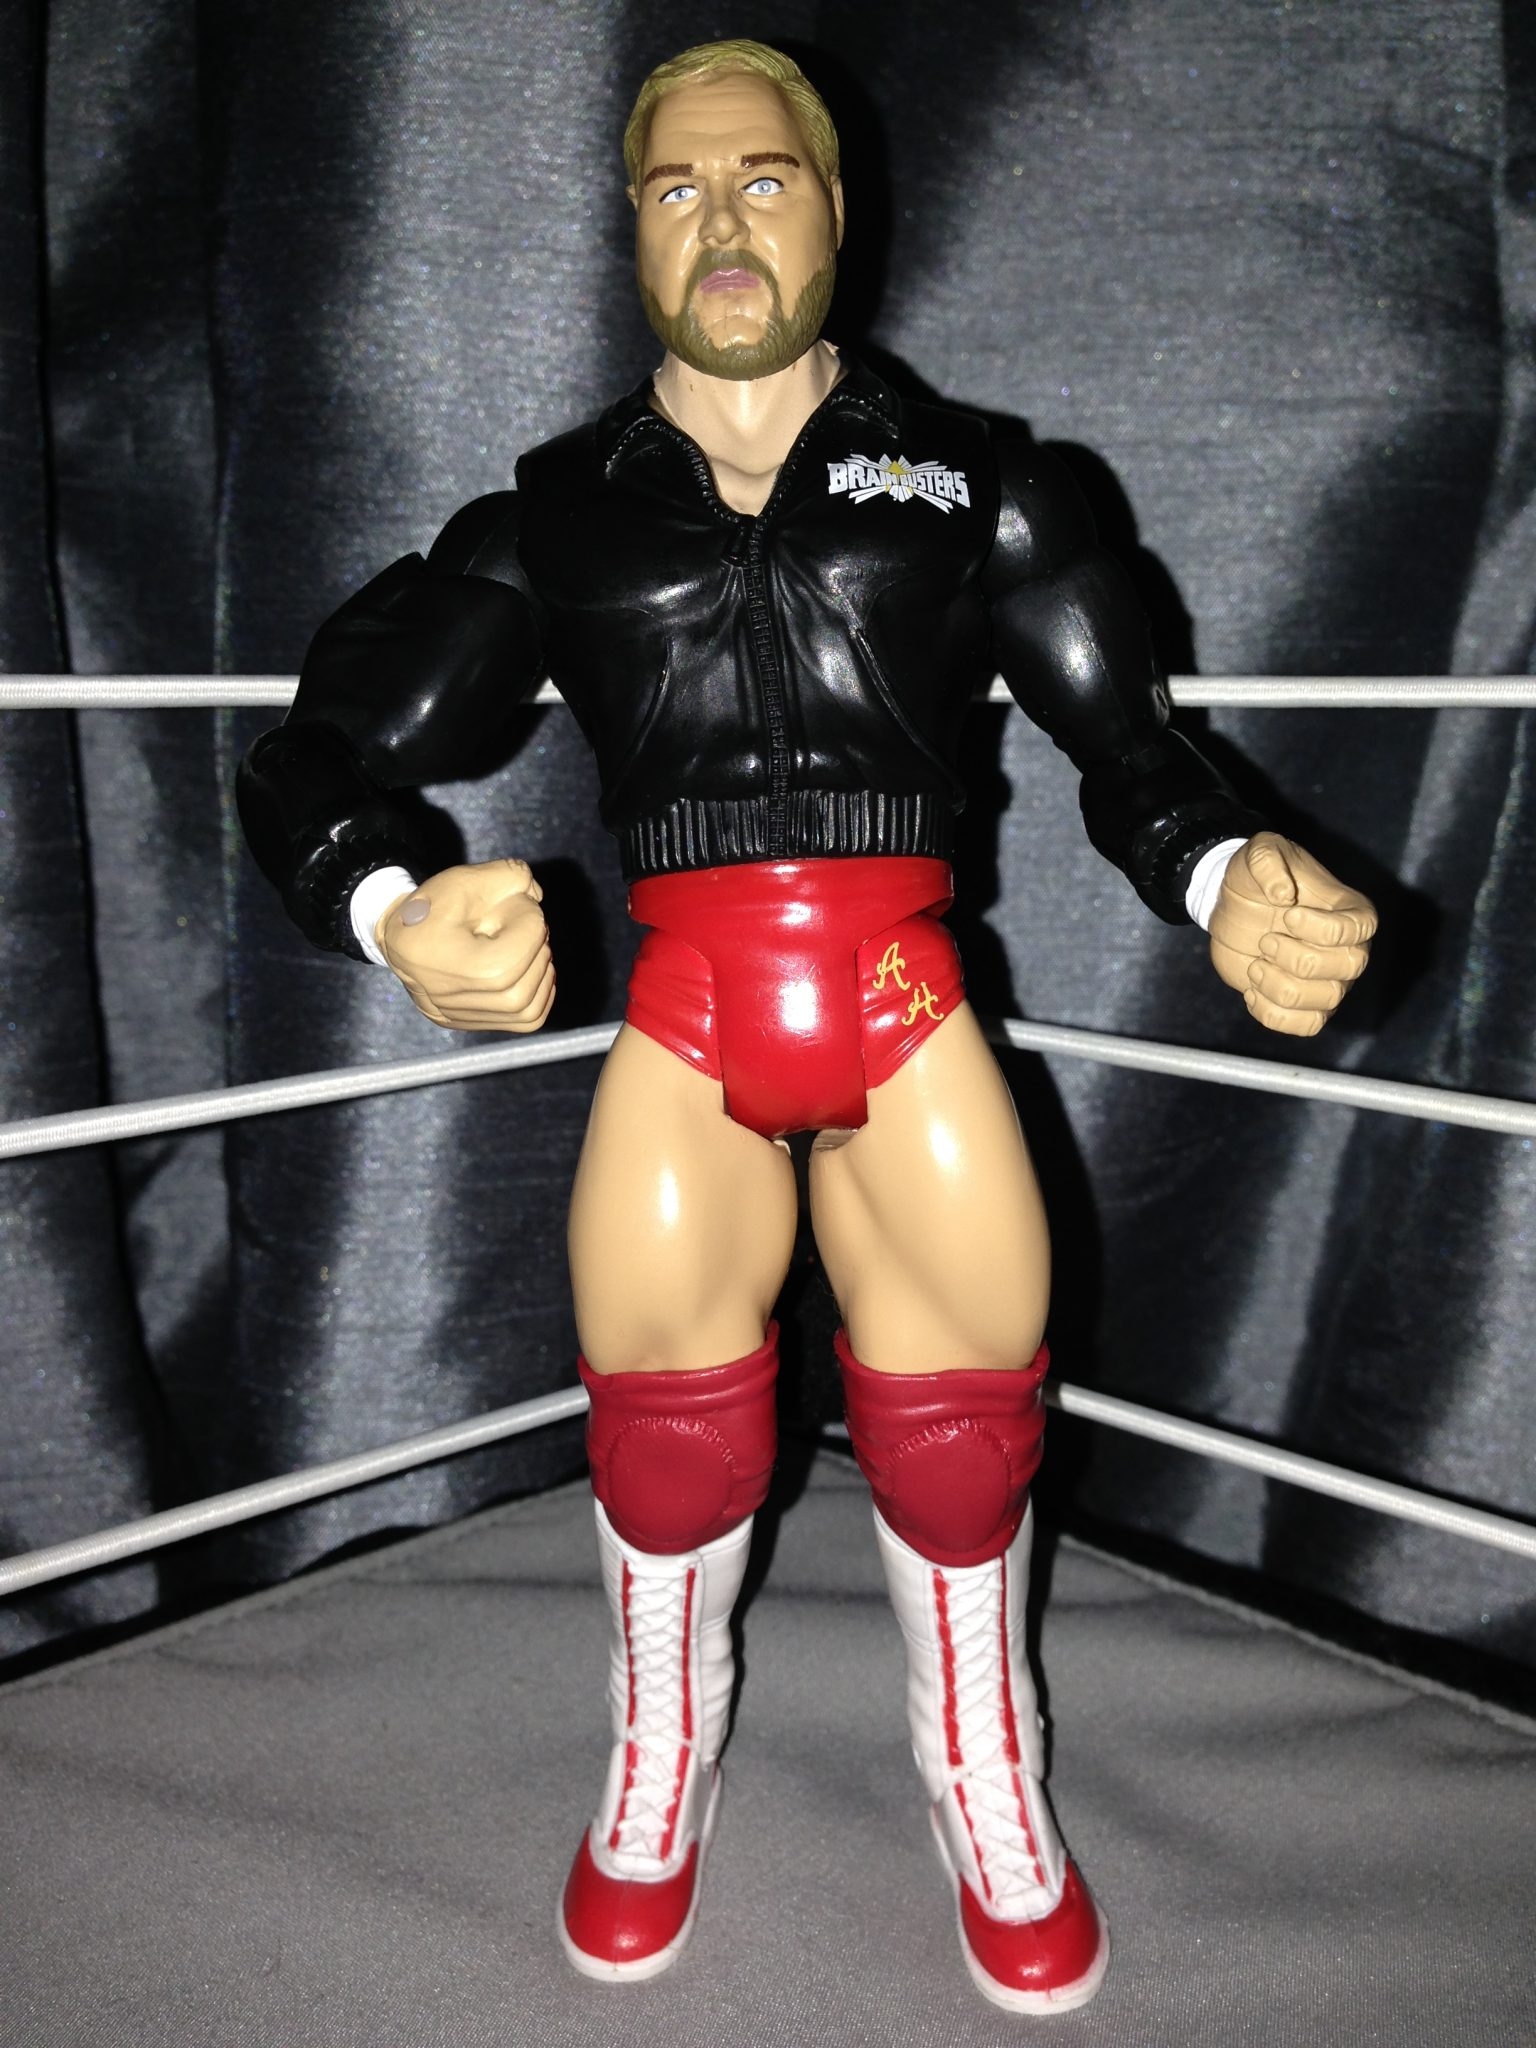 WWE WWF Jakks Classic Superstars Series 12 Arn Anderson Brain-Busters Wrestling Action Figure with Chair 